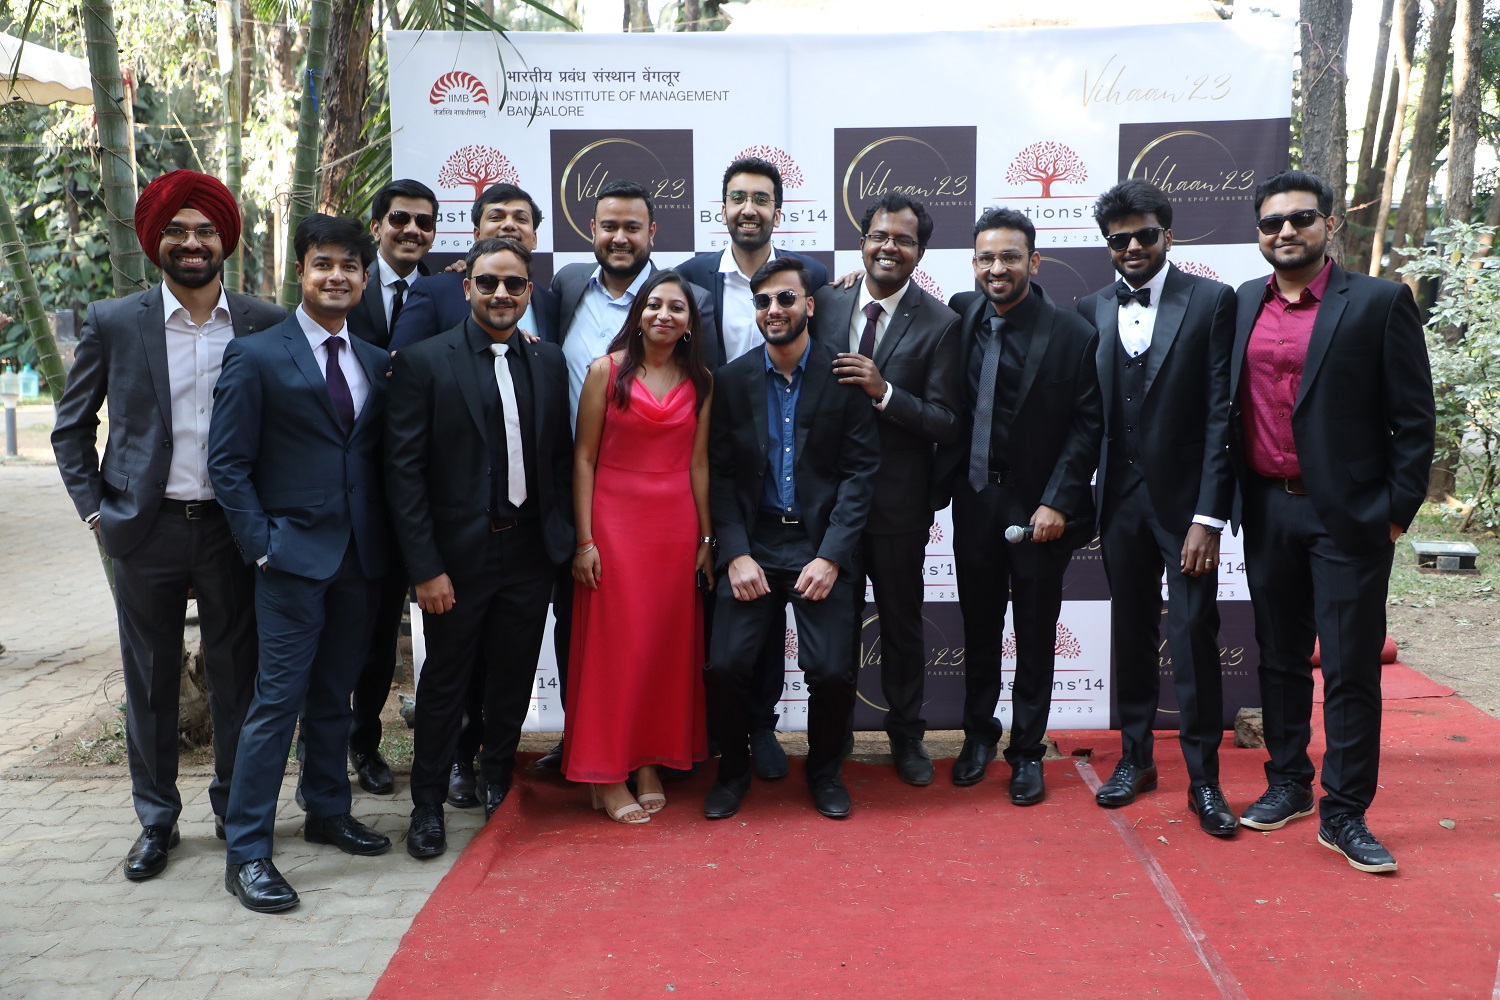 Students of the Executive Post Graduate Programme in Management (EPGP) at their farewell function Vihaan '23, held at the IIMB campus on 5th March 2023.